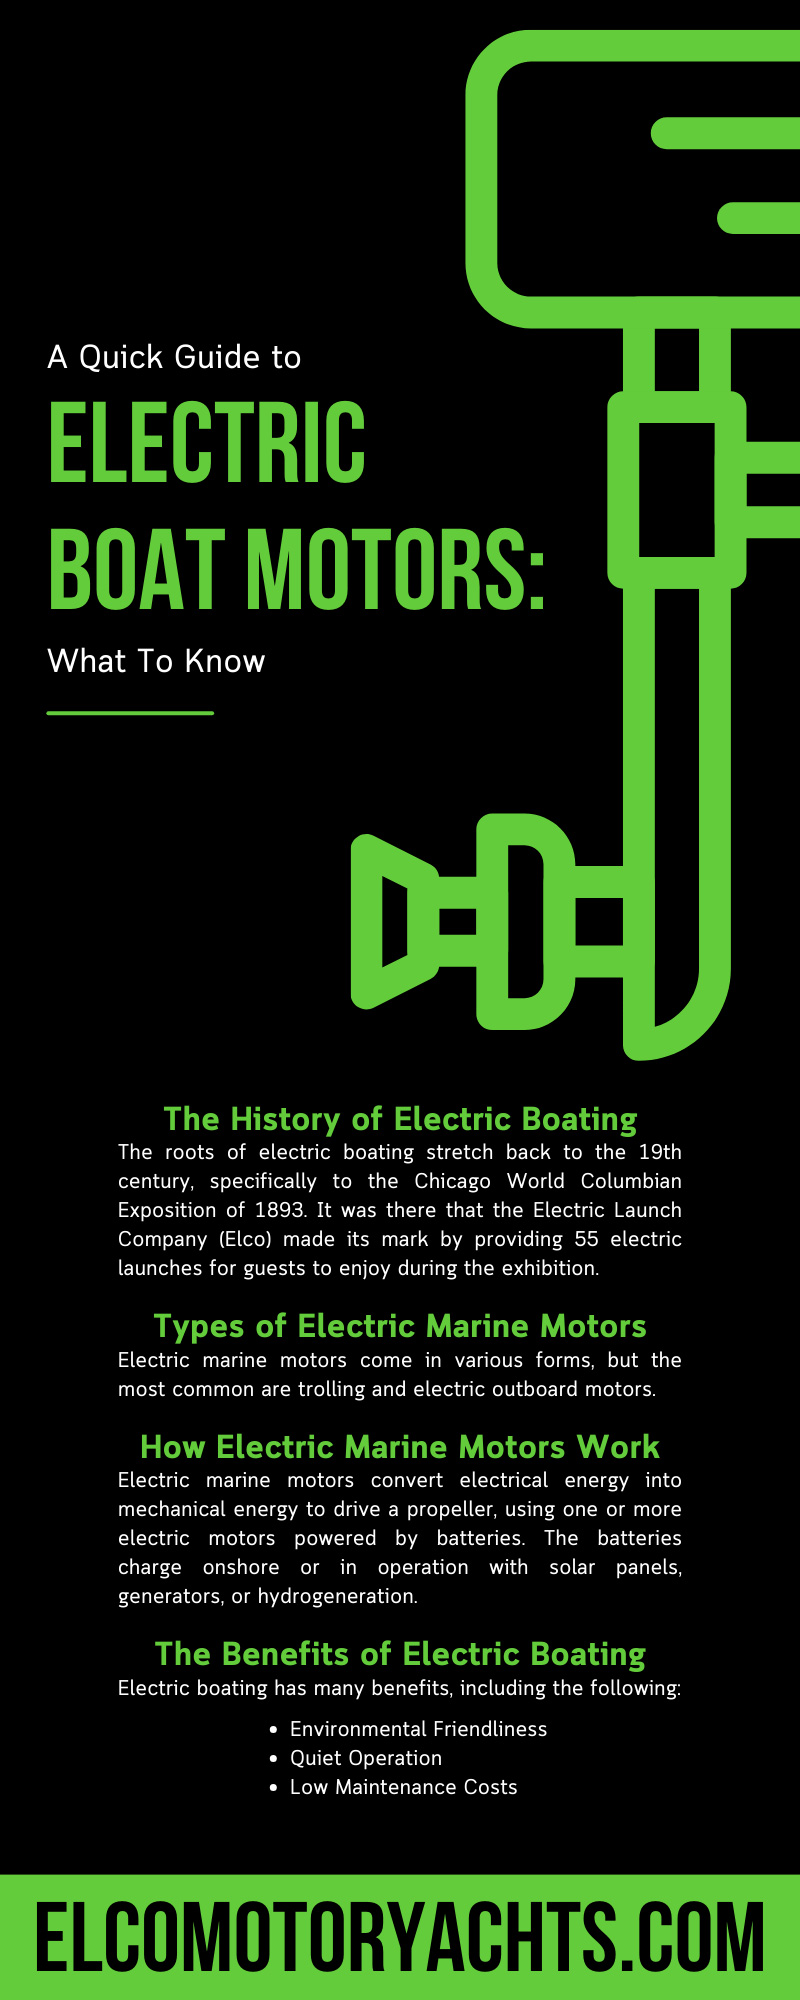 A Quick Guide to Electric Boat Motors: What To Know